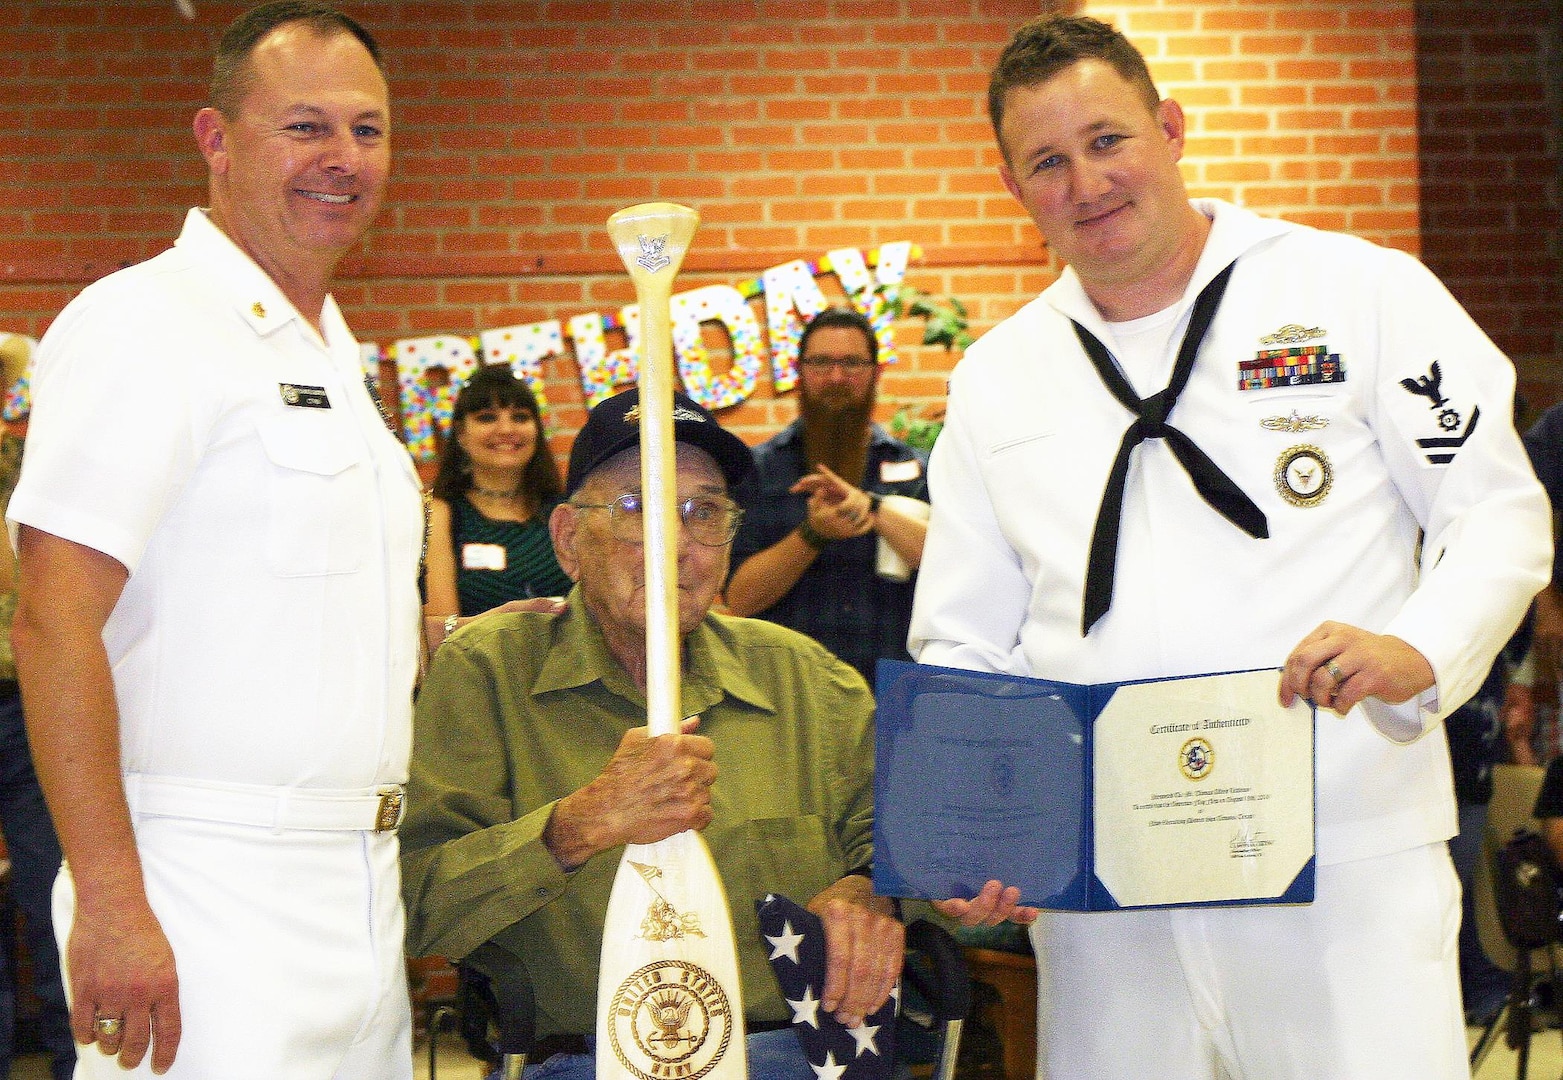 Senior Chief Petty Officer Daniel Christmas (left) and Petty Officer 2nd Class Keyth Curnutt (right) of the Navy Recruiting District San Antonio present 100-year-old Navy veteran Tom Littleton with an American flag and a special Navy paddle at a special celebration in Devine.